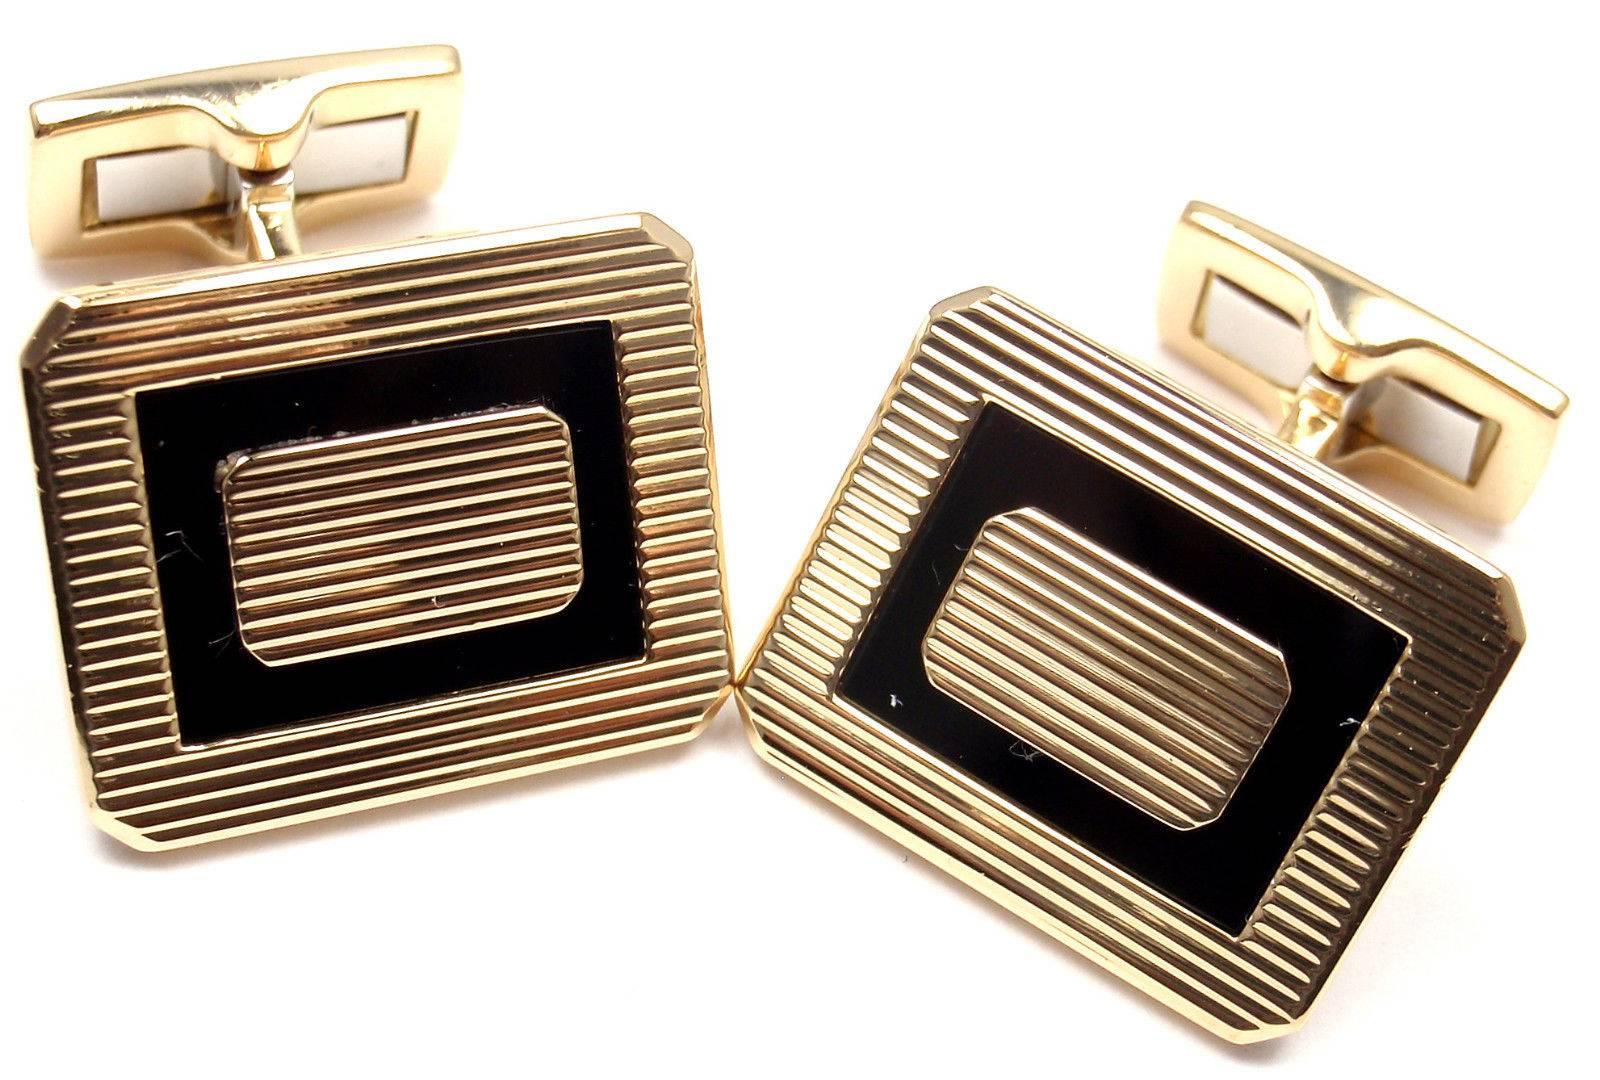 18k Yellow Gold And Black Onyx Cufflinks by Piaget.

Details: 
Cufflinks: 24mm x 20mm x 15mm
Weight:	19.7 grams
Stamped Hallmarks: Piaget 750

*Free Shipping within the United States*

YOUR PRICE: $2,700

0617mdhd